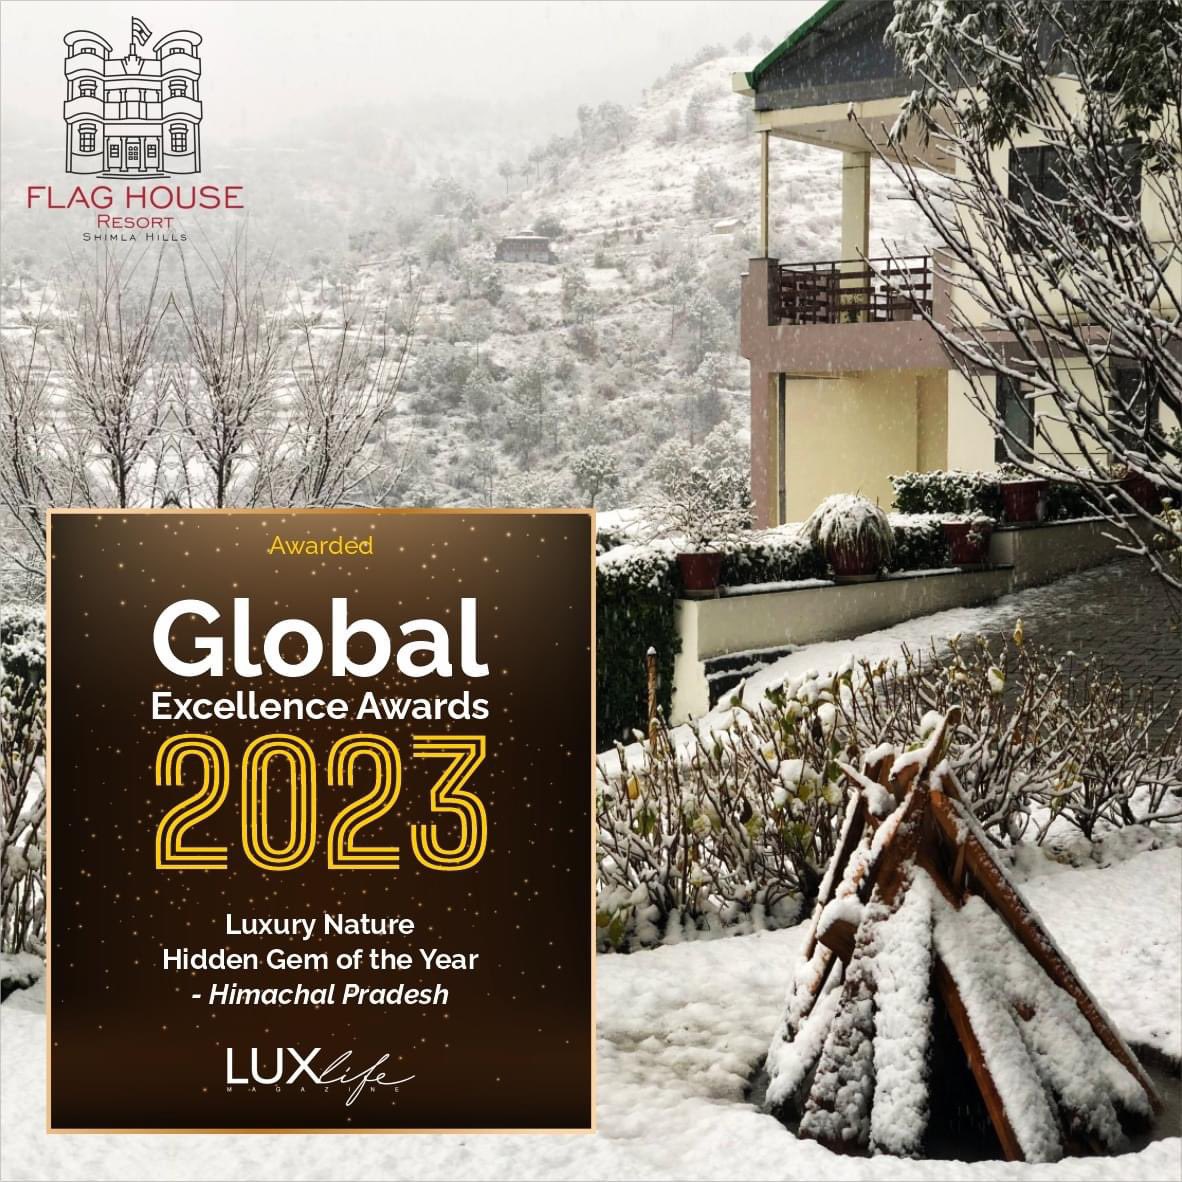 Delighted to announce our triumph as the Luxury Nature Hidden Gem of the Year - Himachal Pradesh, awarded by LUX Global Excellence Awards 2023. A testament to our commitment to unparalleled hospitality. Thank you to all our guests and partners for their continued support! ✨🏔️